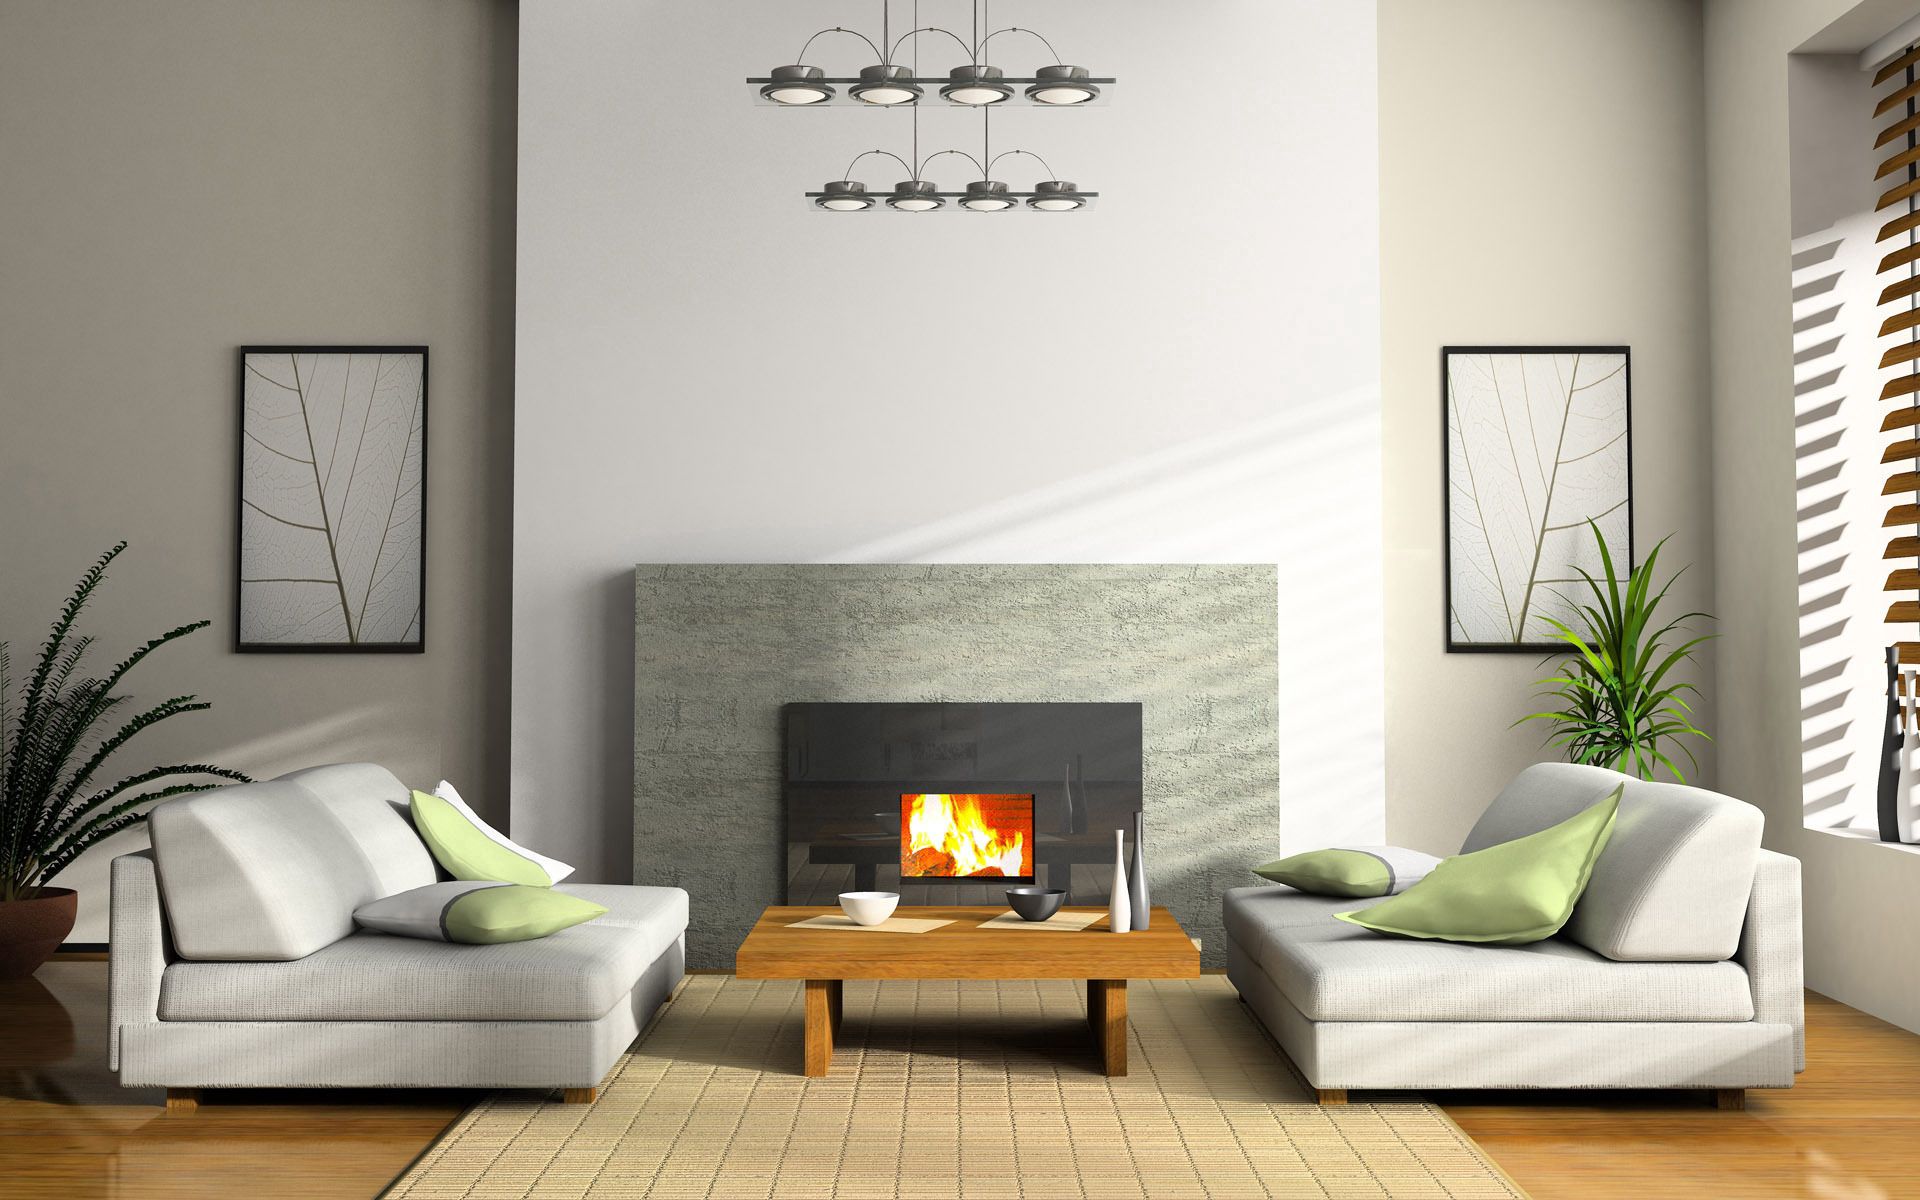 plants, fire, interior, paintings, miscellanea, miscellaneous, cup, design, table, room, vase, style, sofa, armchair, paper, fireplace, apartment, flat wallpaper for mobile